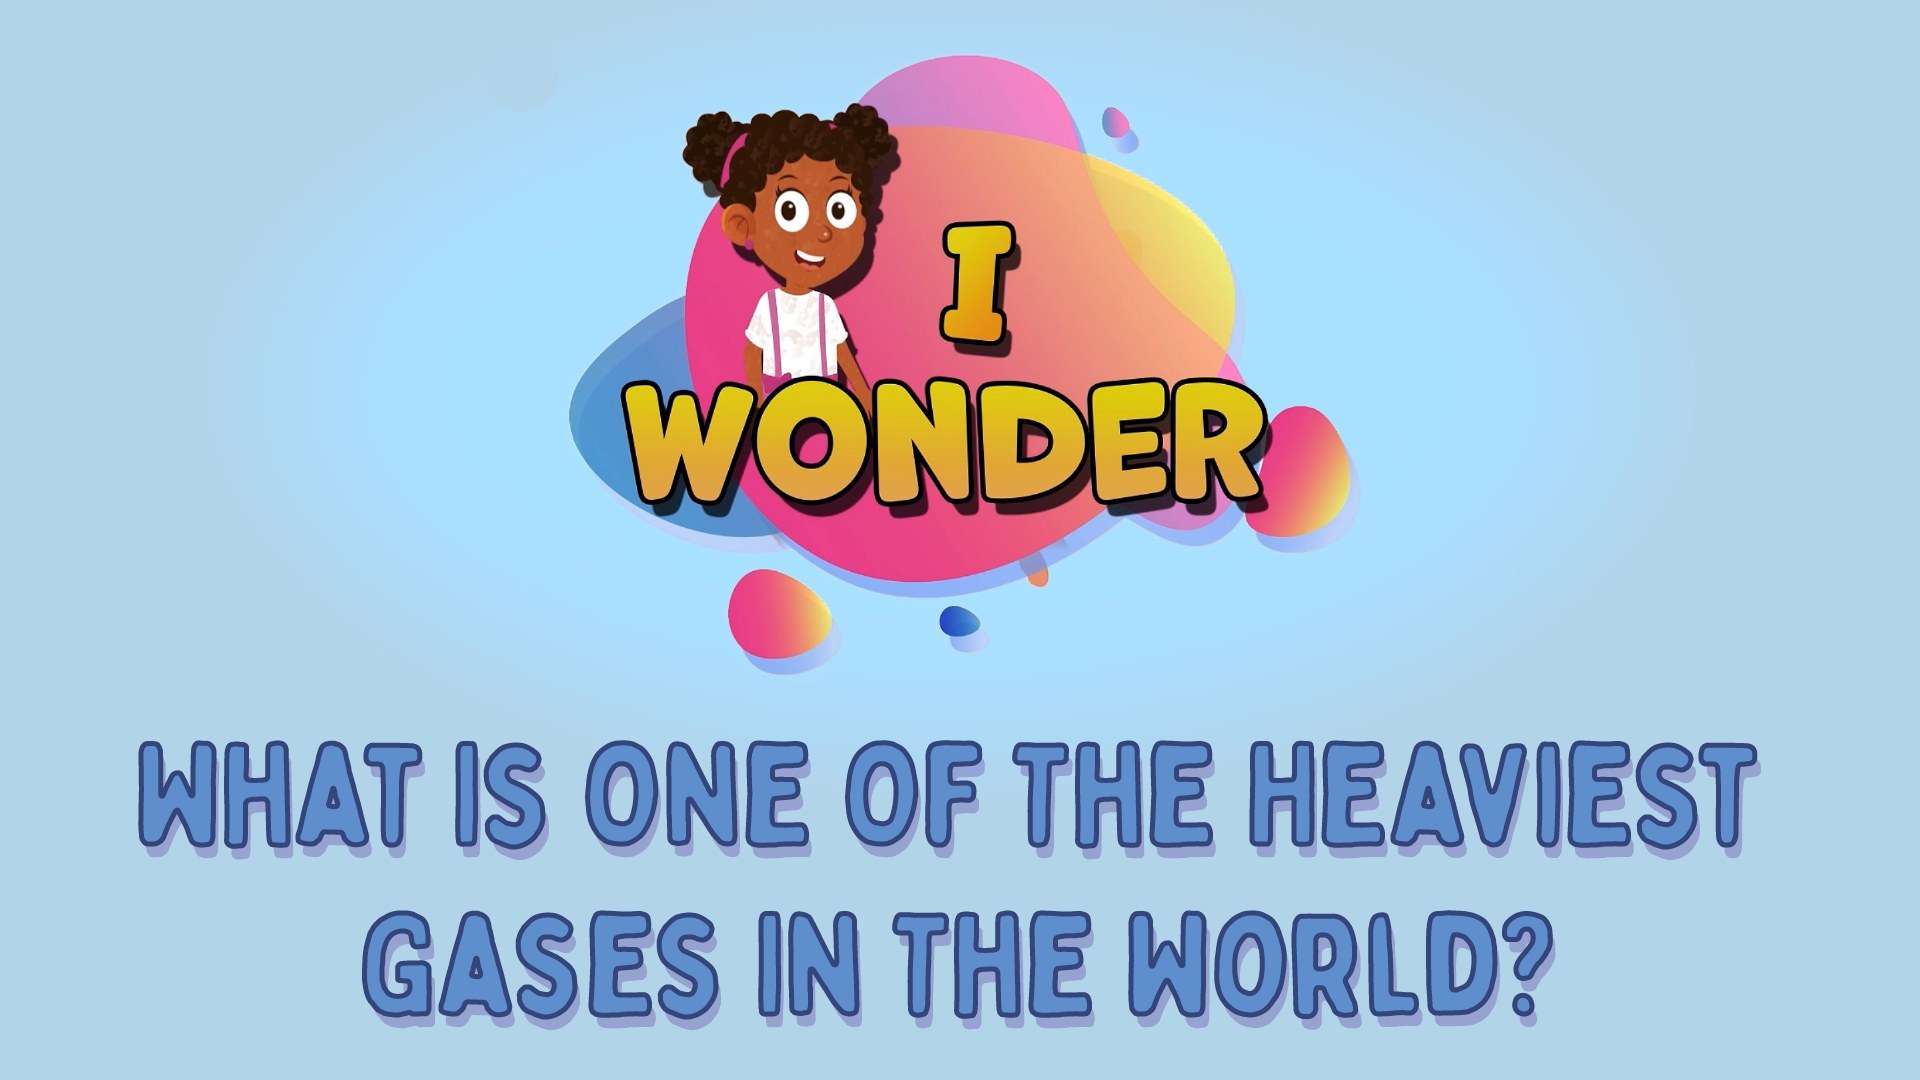 What Is One Of The Heaviest Gases In The World?